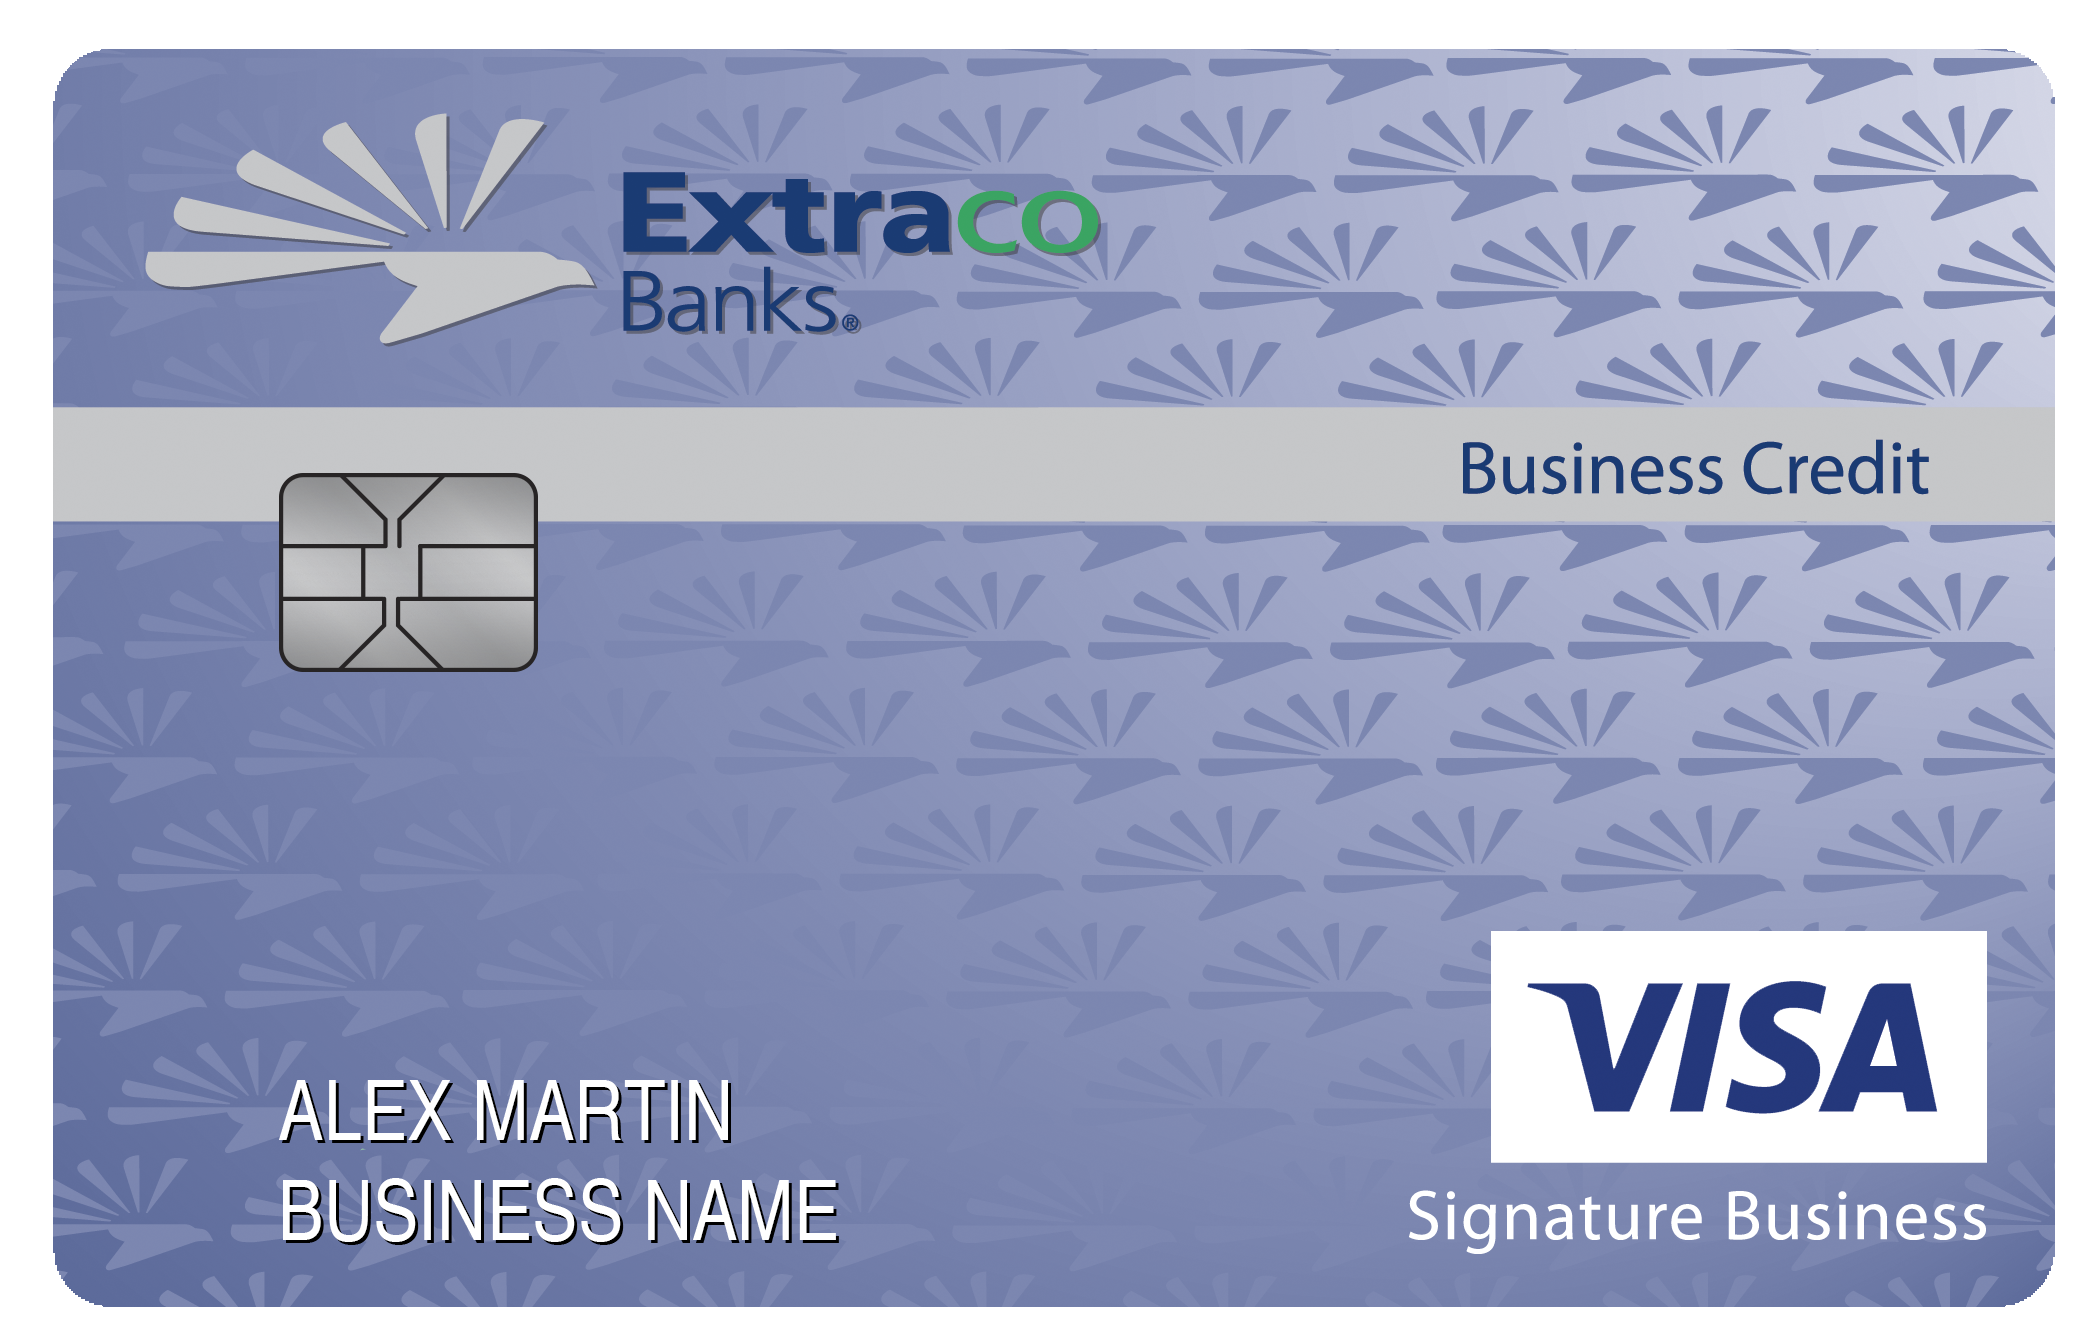 Extraco Banks Smart Business Rewards Card